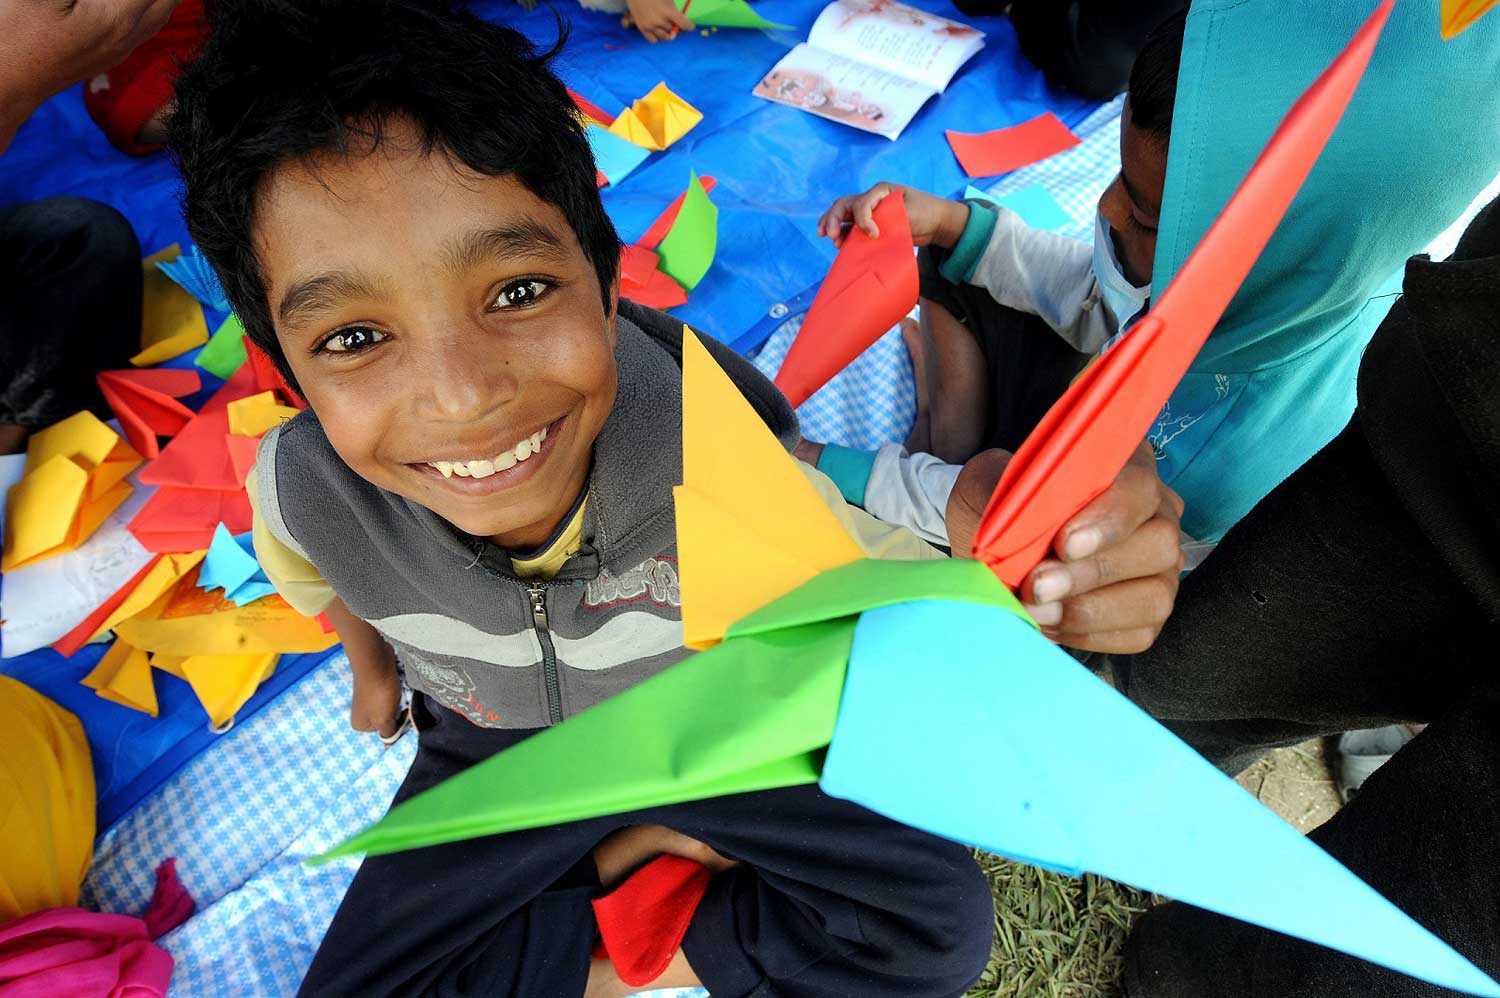 Twelve-year-old Sajan plays at the child-friendly space, which provides a safe refuge for children affected by the Nepal earthquake. Photo: Unicef Nepal/2015/CSKarki